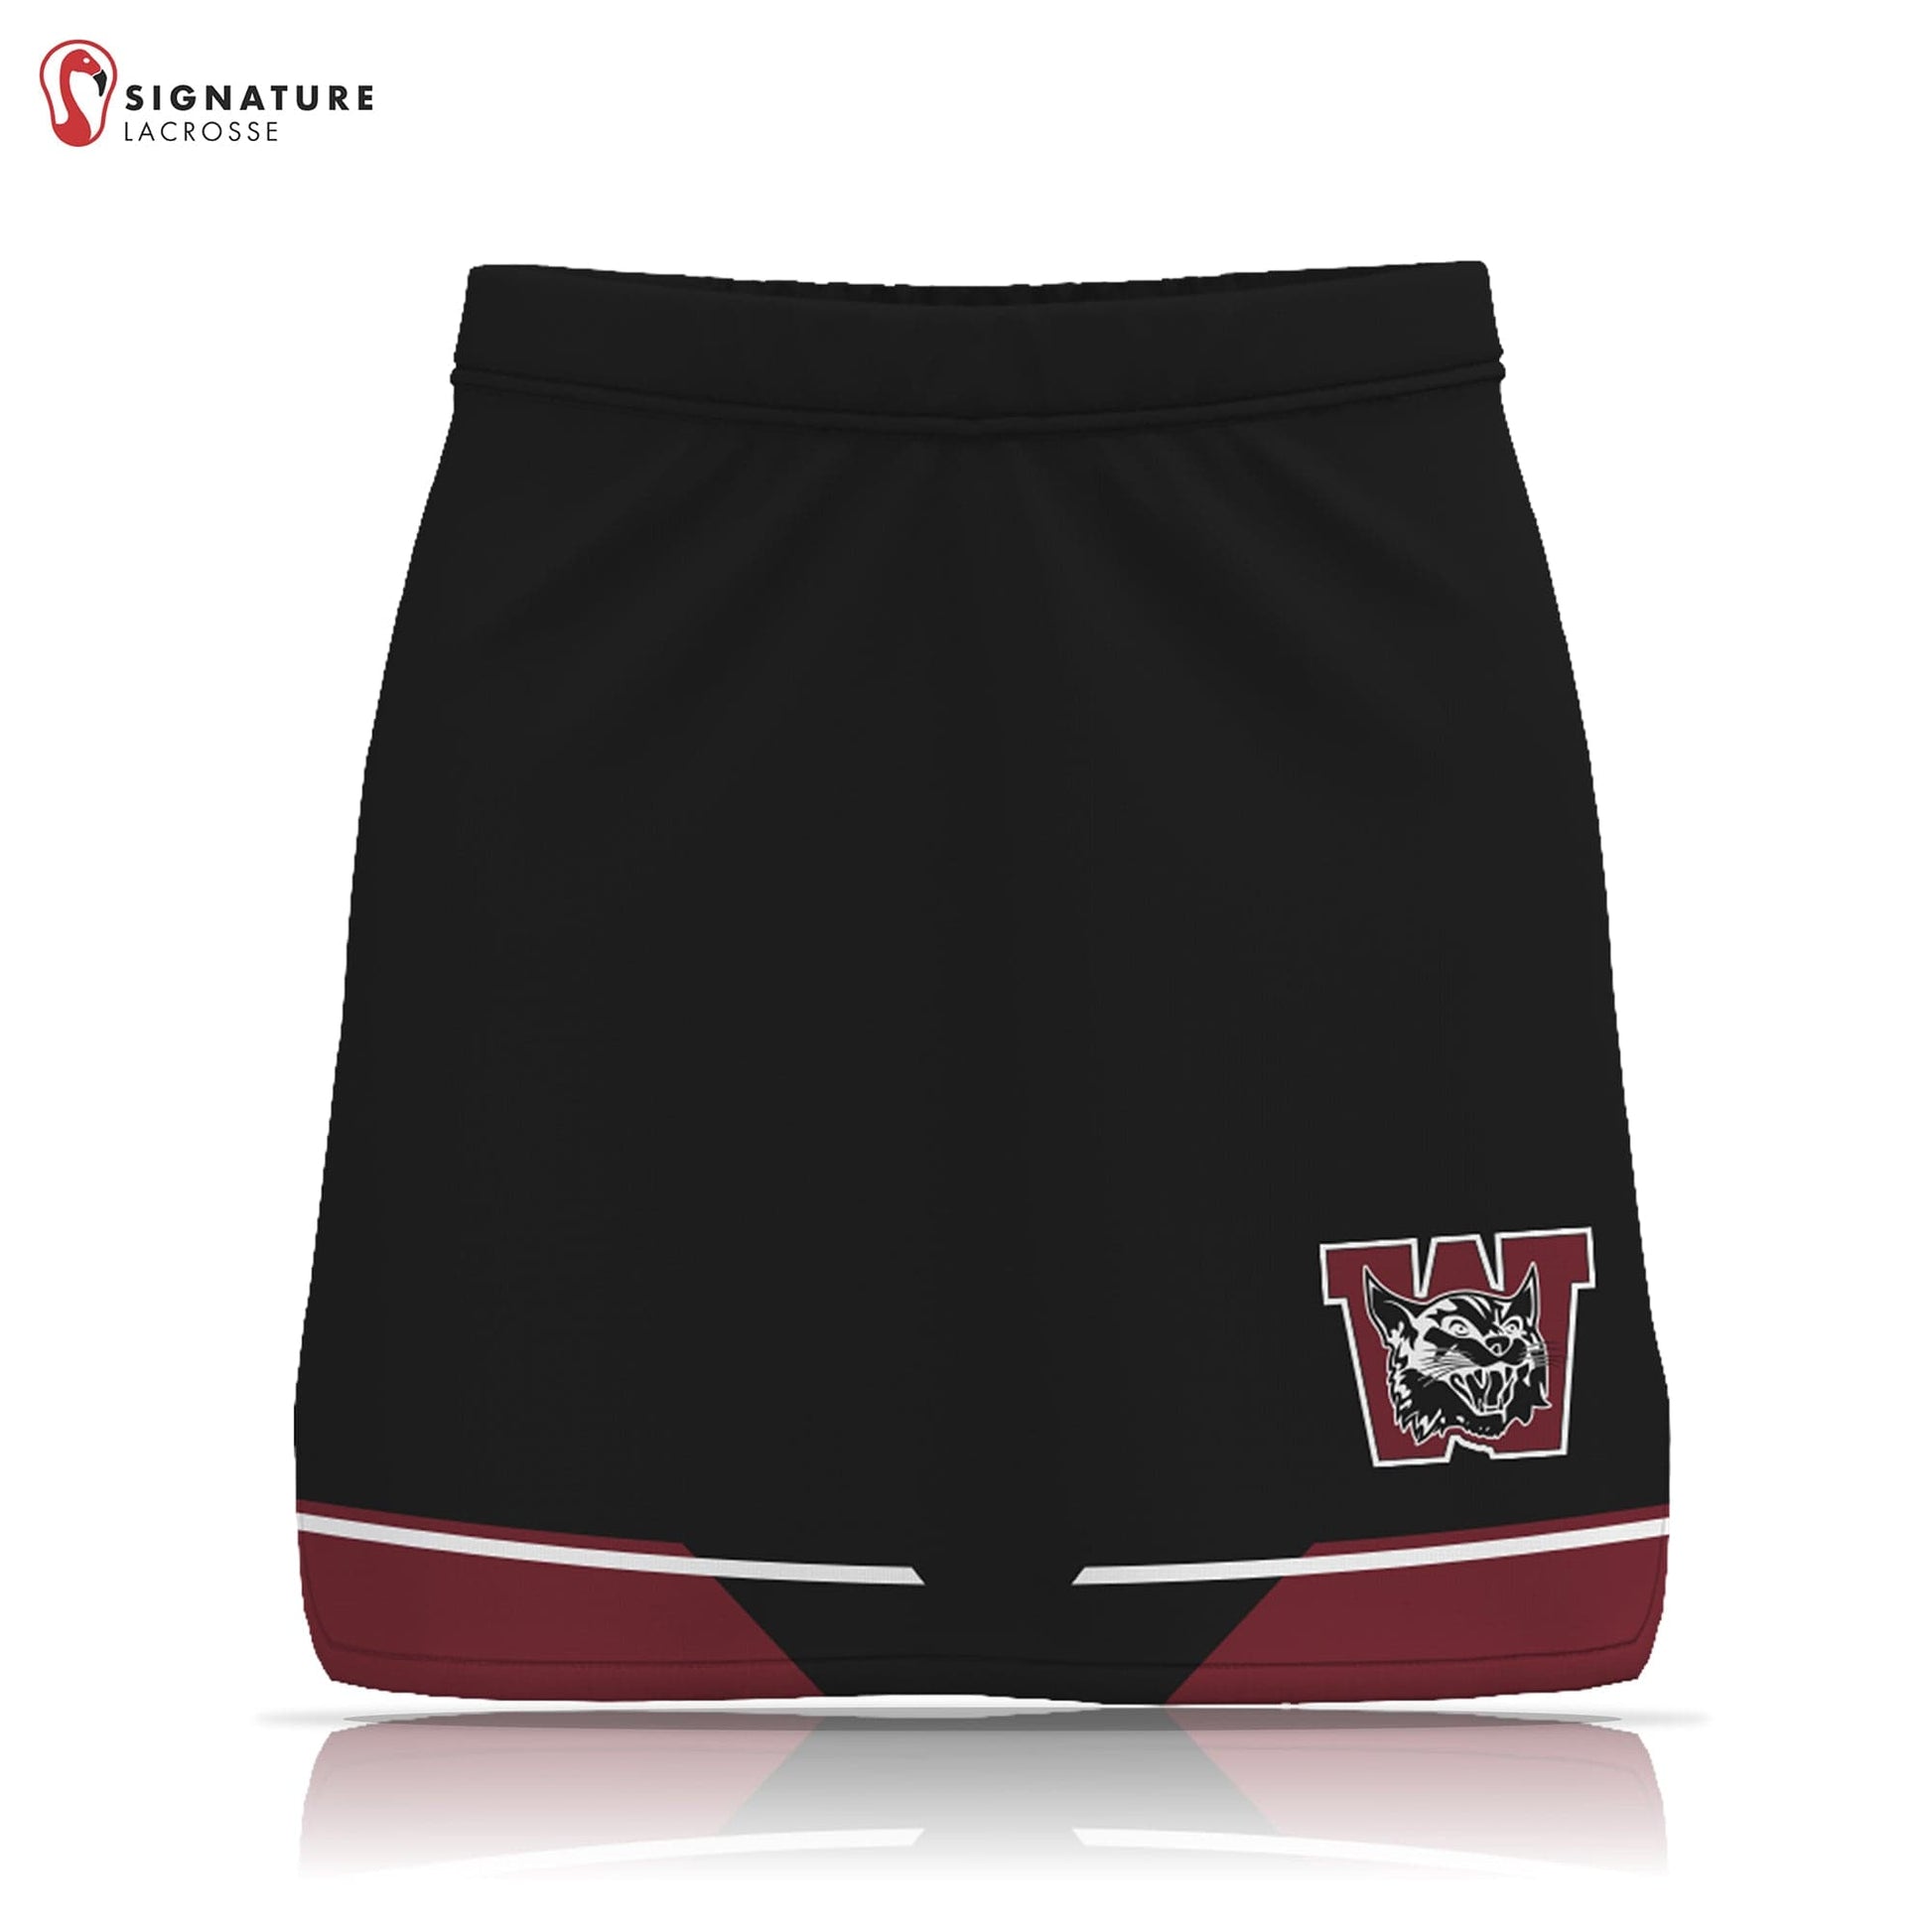 Weston Youth Lacrosse Women's Player Game Skirt: Grade 3-4 Signature Lacrosse